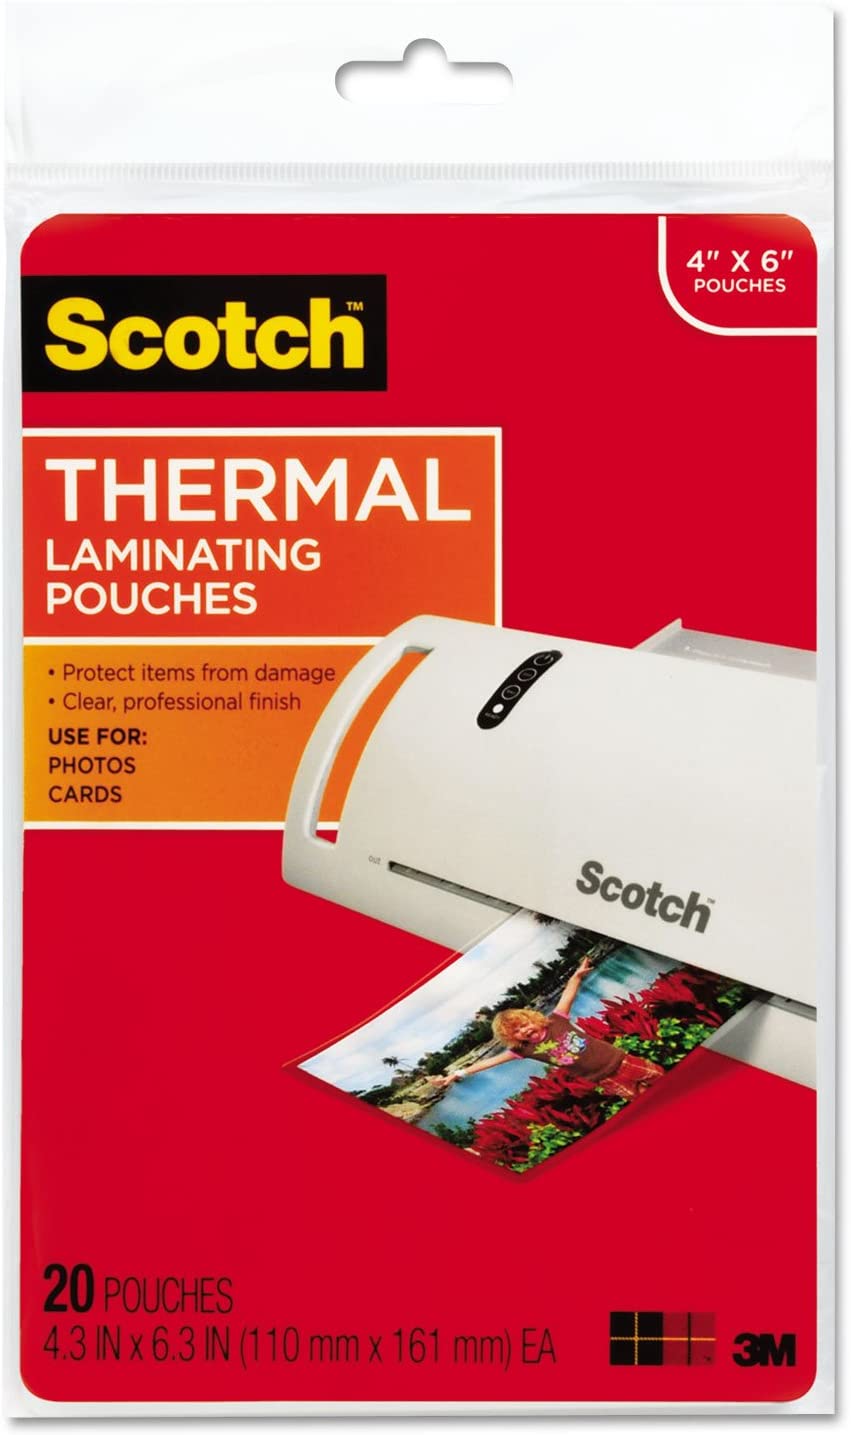 Scotch Thermal Pouches TP5900-20 for items ups to 4.33 in x 6.06 in, 5 mil Laminating Pouches 20/Pack